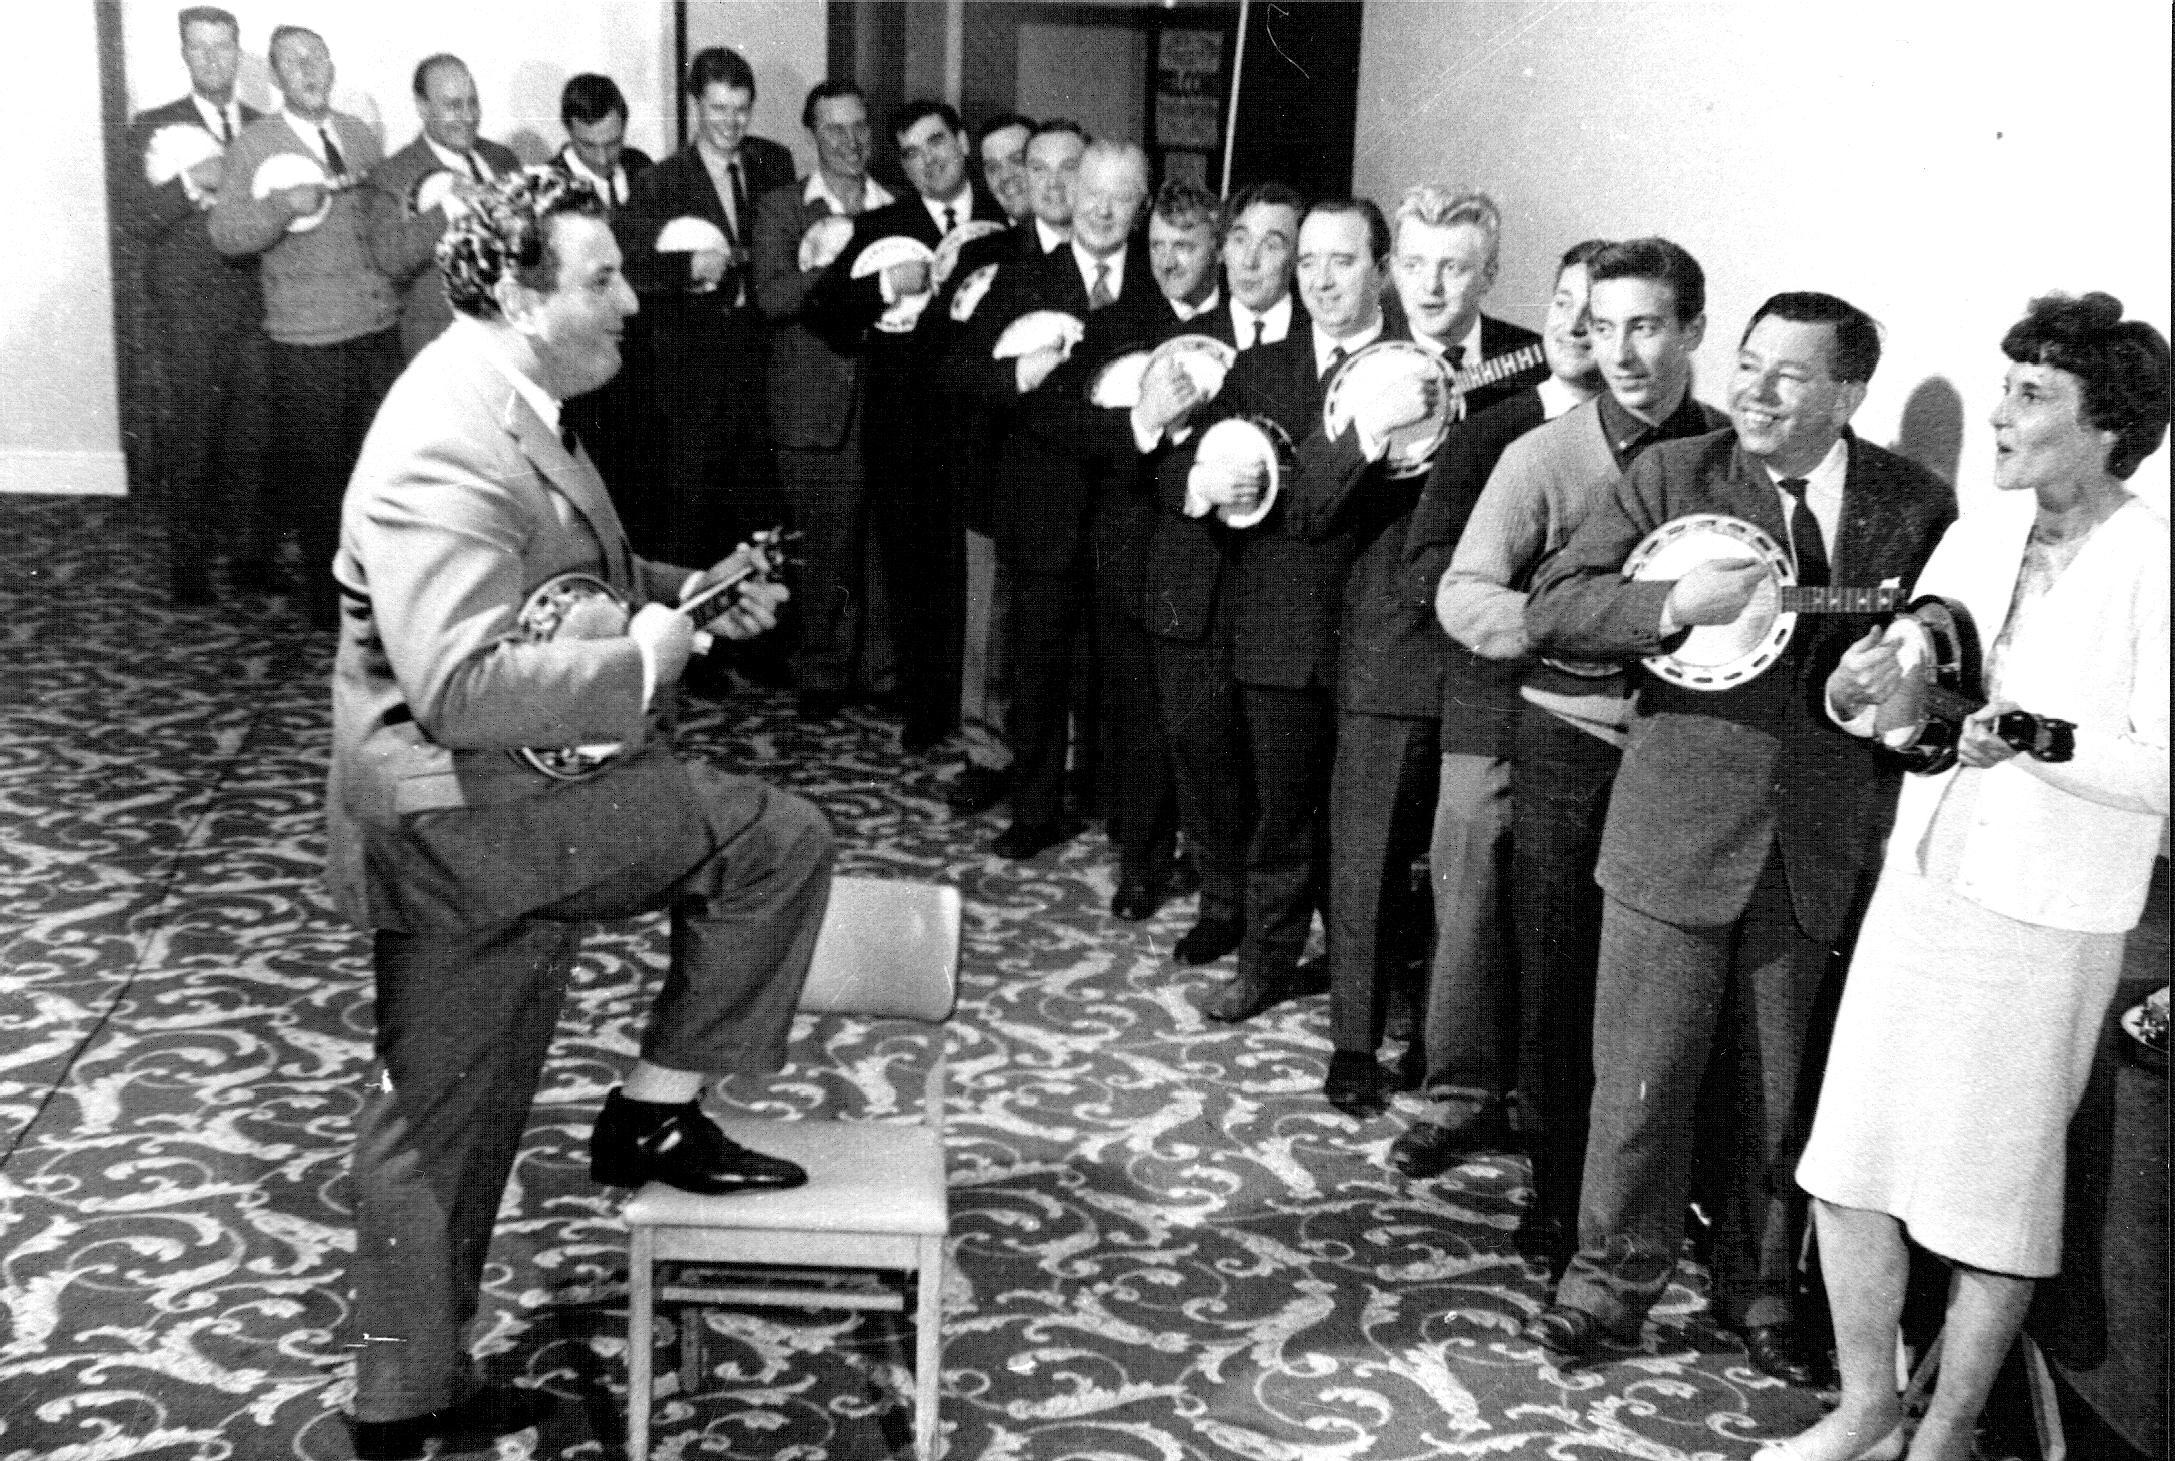 A line of ukulele players including George Formby facing a ukulele player with his foot on chair. Included in the exhibition Fan Club And My Generation.